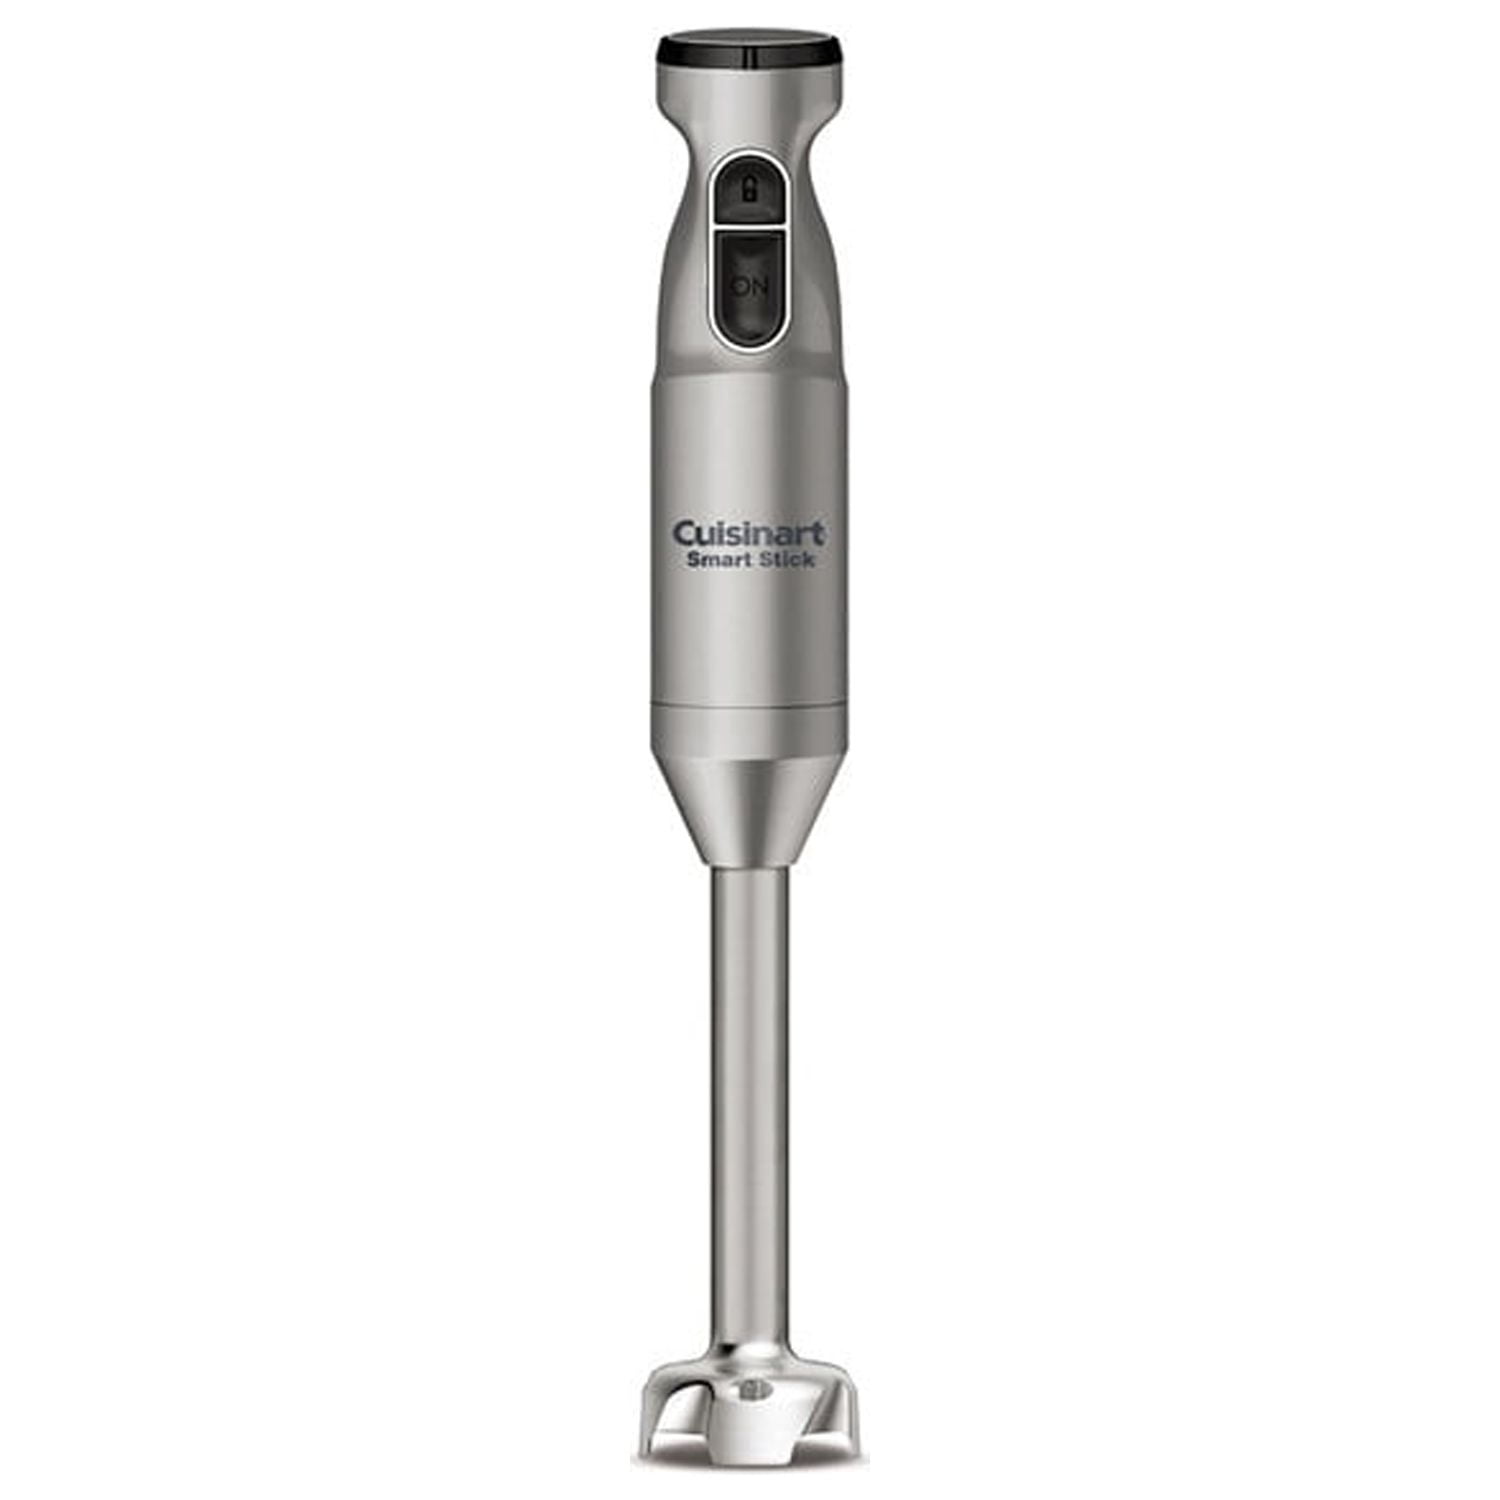 How to Clean a Cuisinart Hand Blender – The Crafty Wineaux